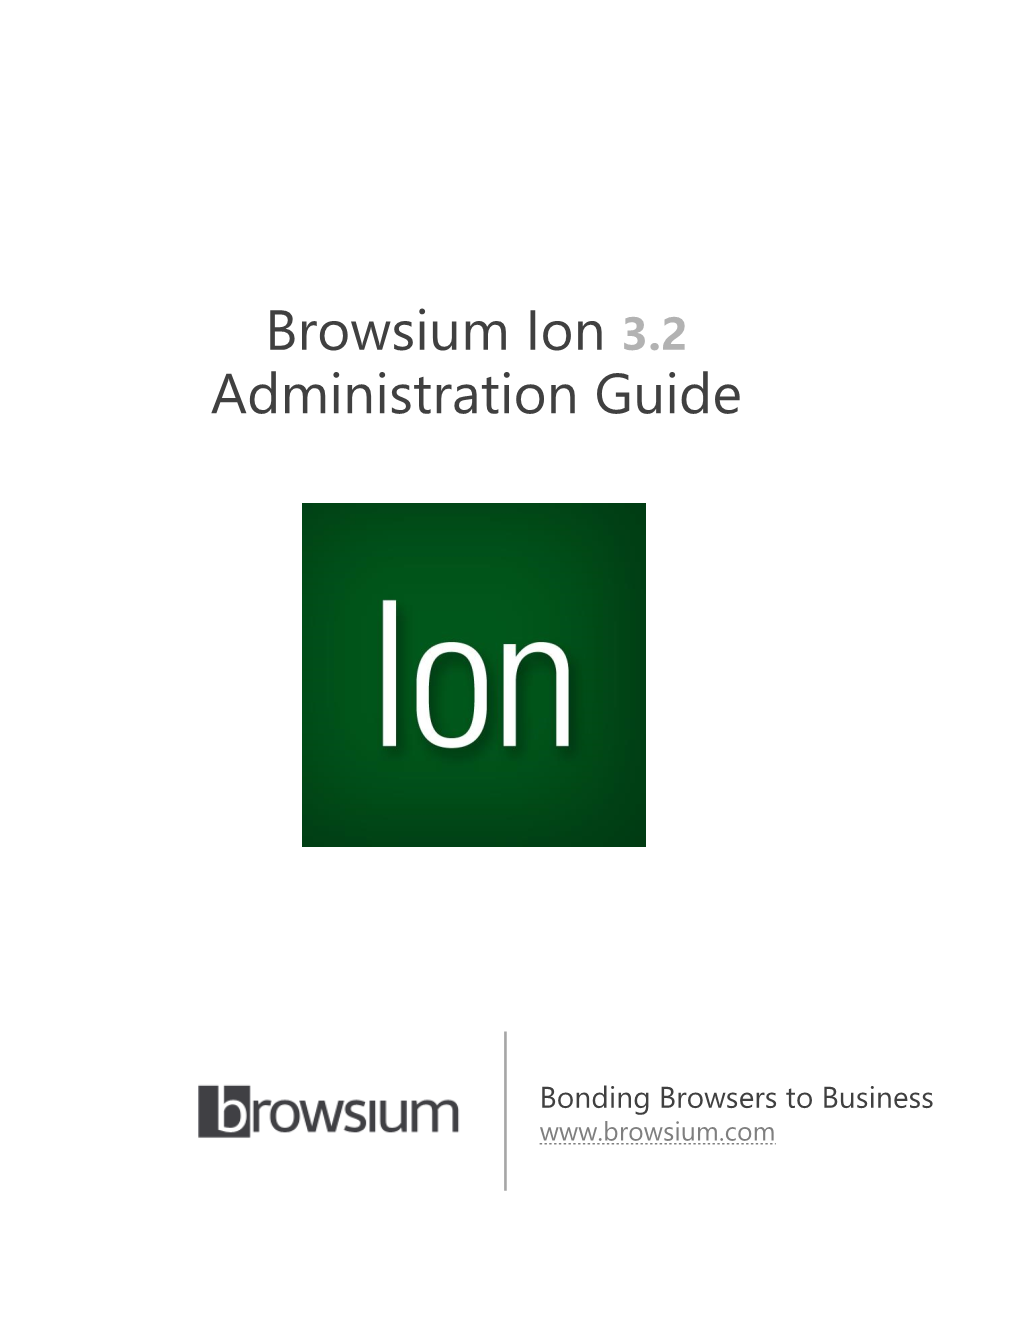 Browsium Ion 3.2 Administration Guide